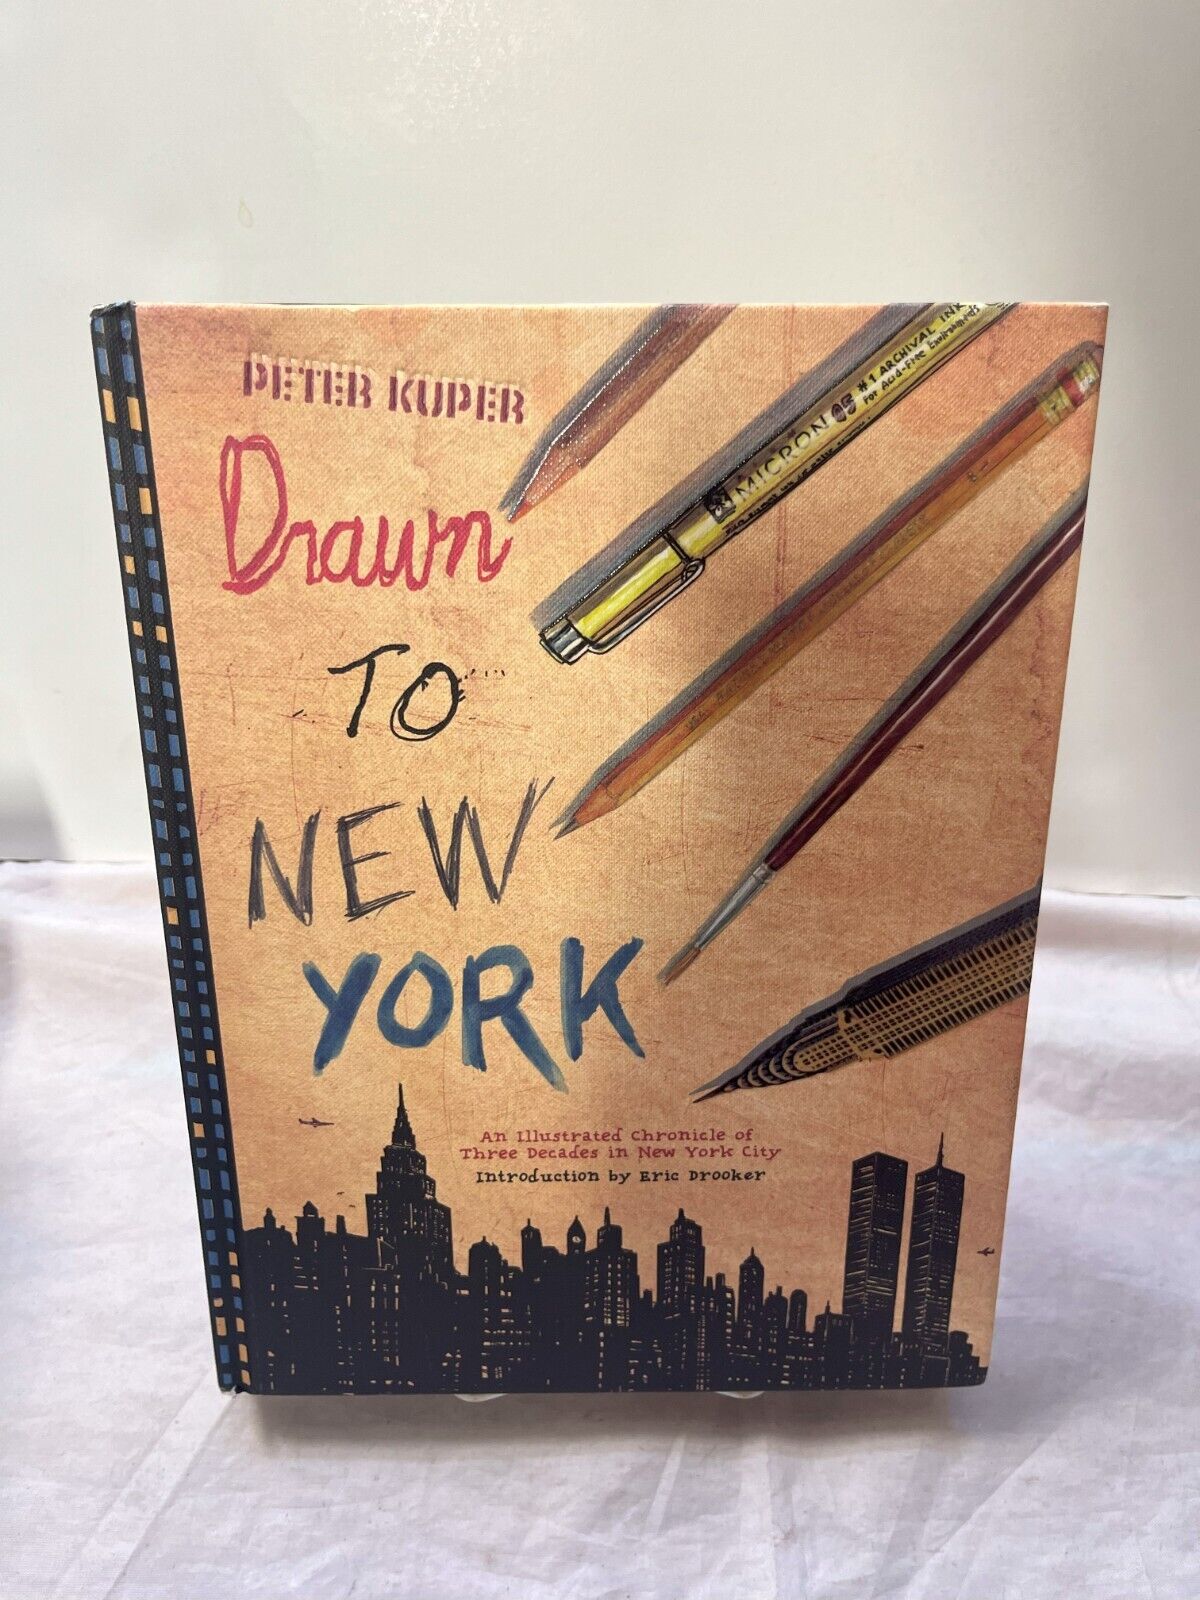 Drawn to New York: An Illustrated Chronicle of Three Decades in NY | Peter Kuper